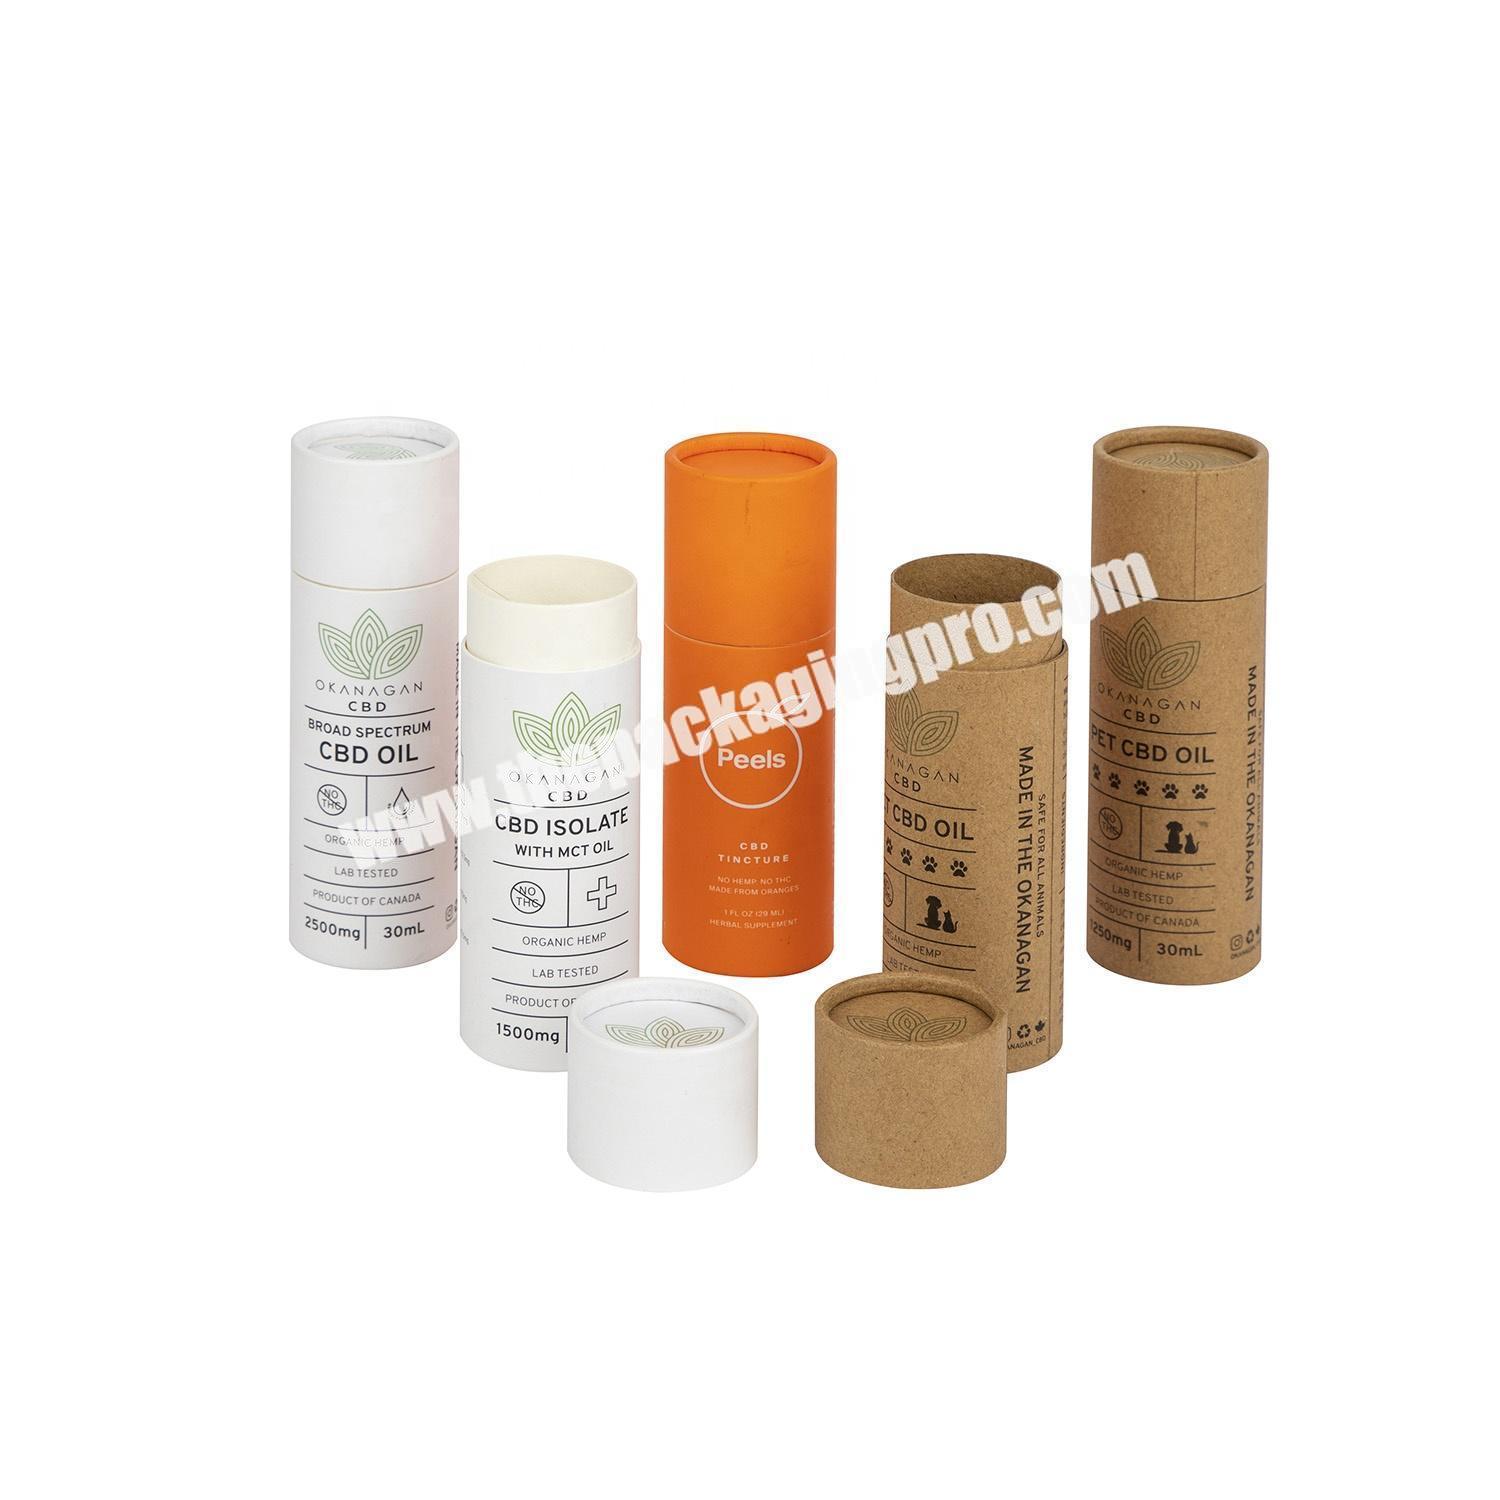 Push Up 20g Lip Balm Paper Cardboard Tubes in Packaging Tubes Cardboard Lip Balm Tube